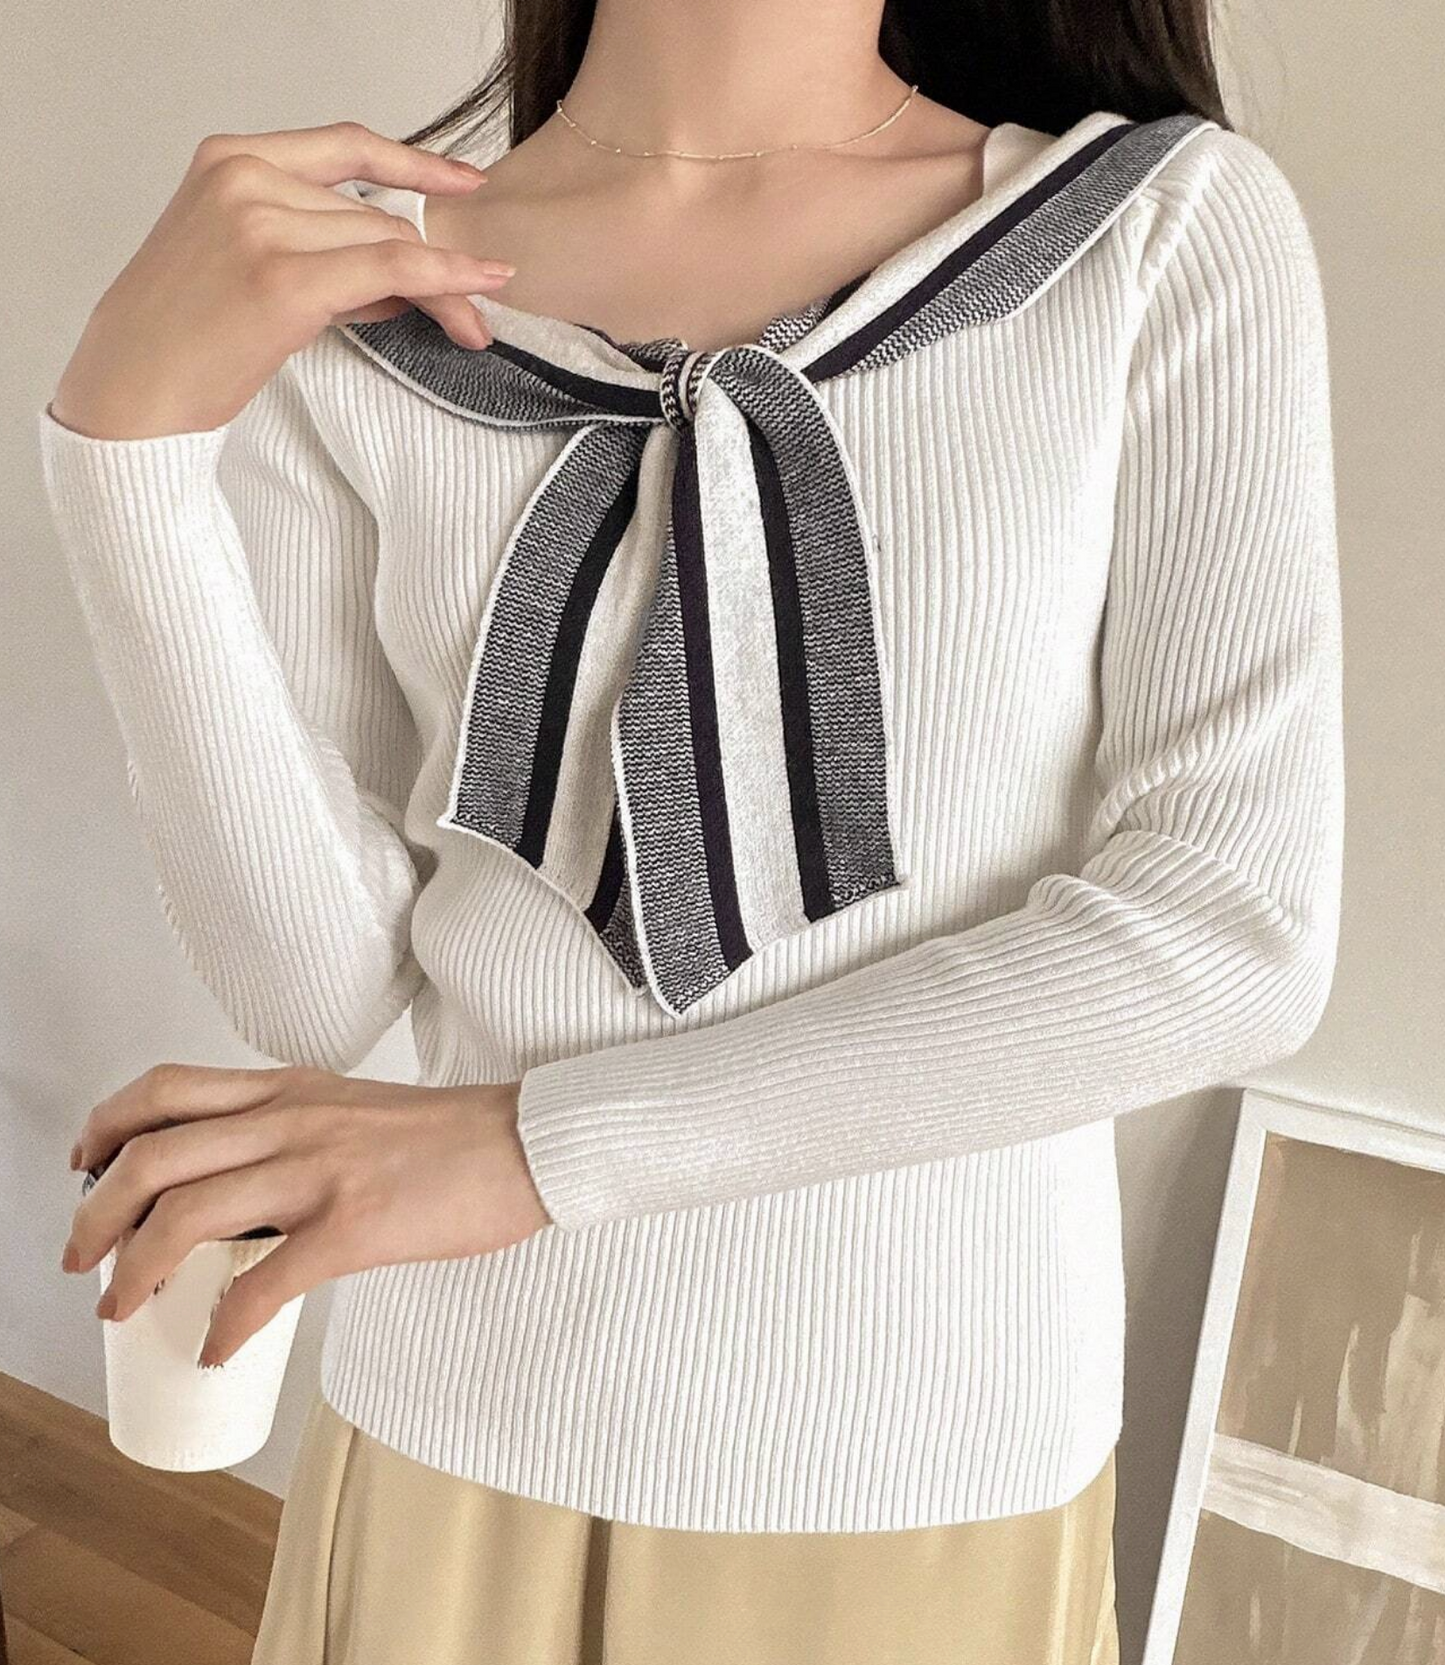 Spring Outfit♥ Ribbed Bow Tie Knit